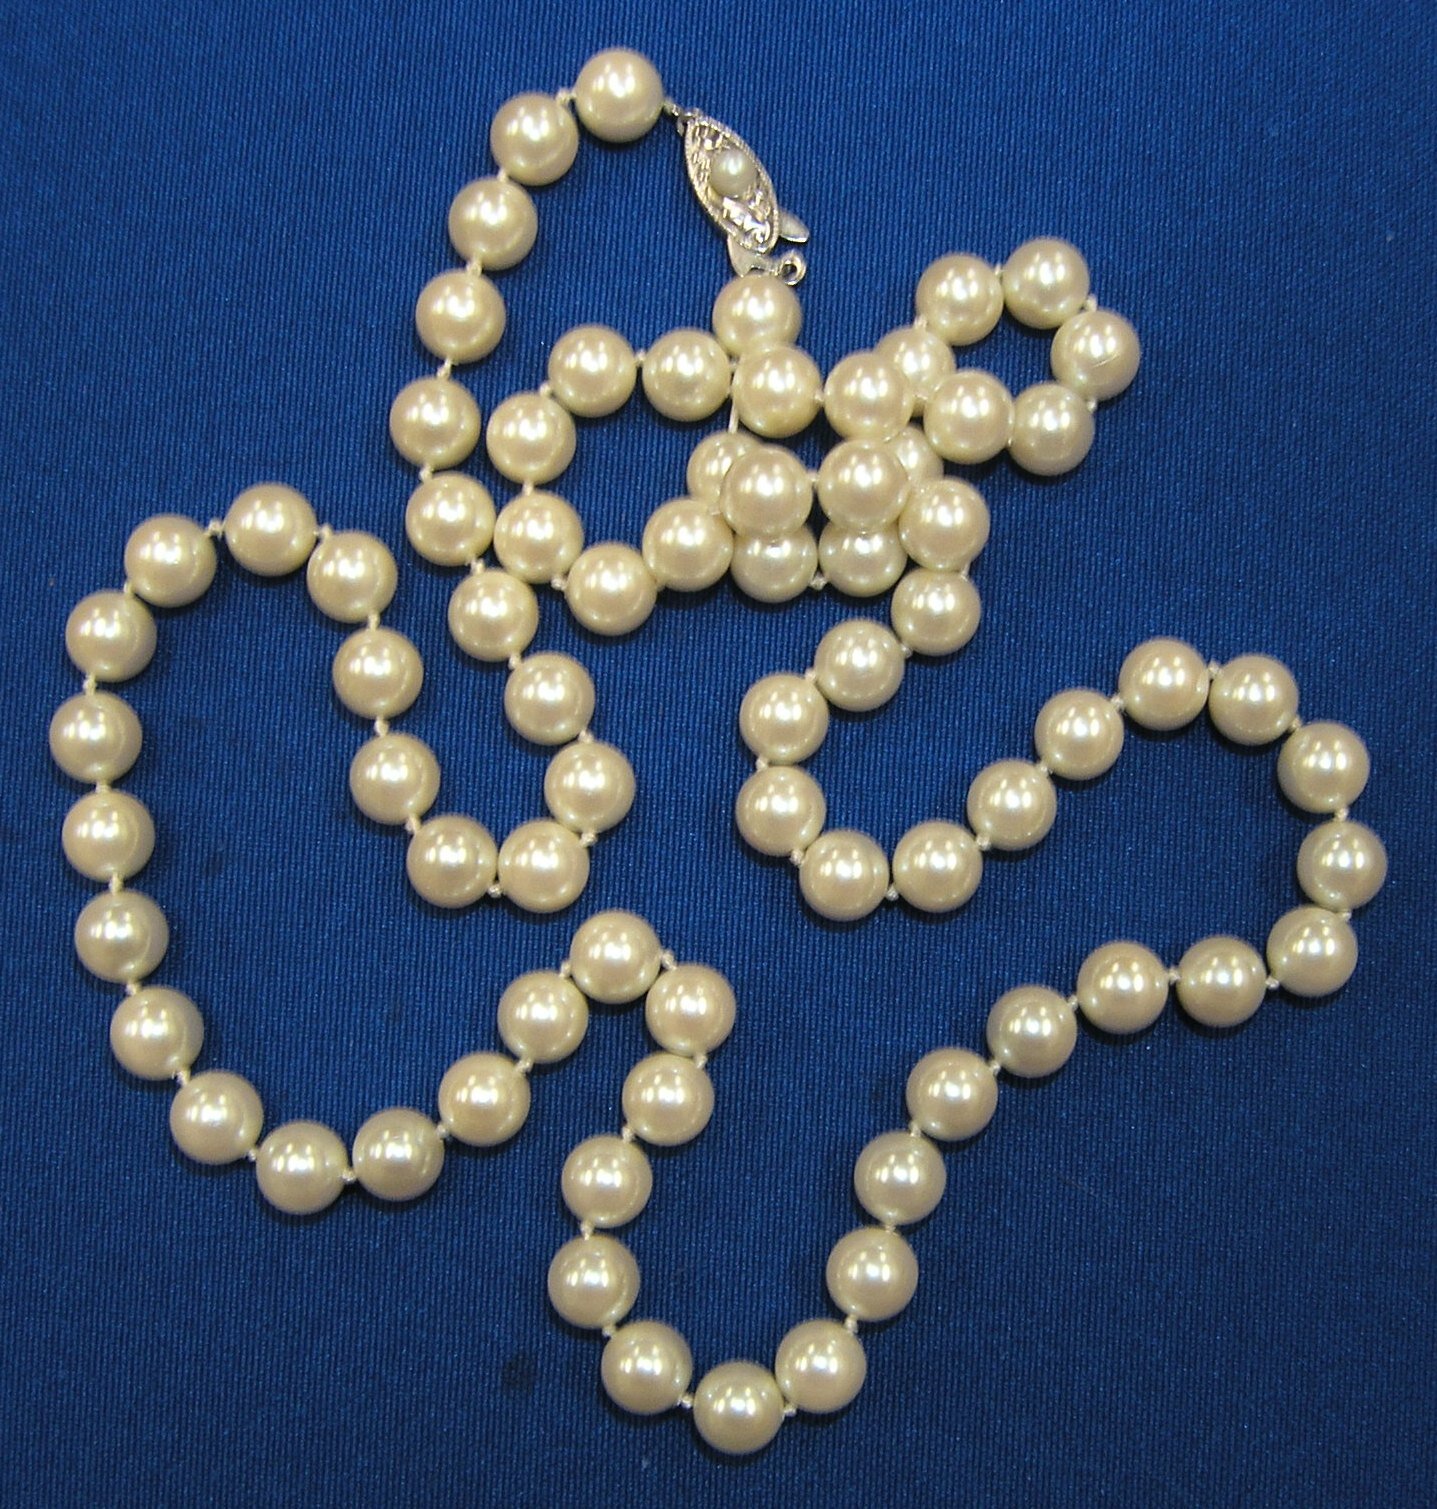 PEARL KNOTTING